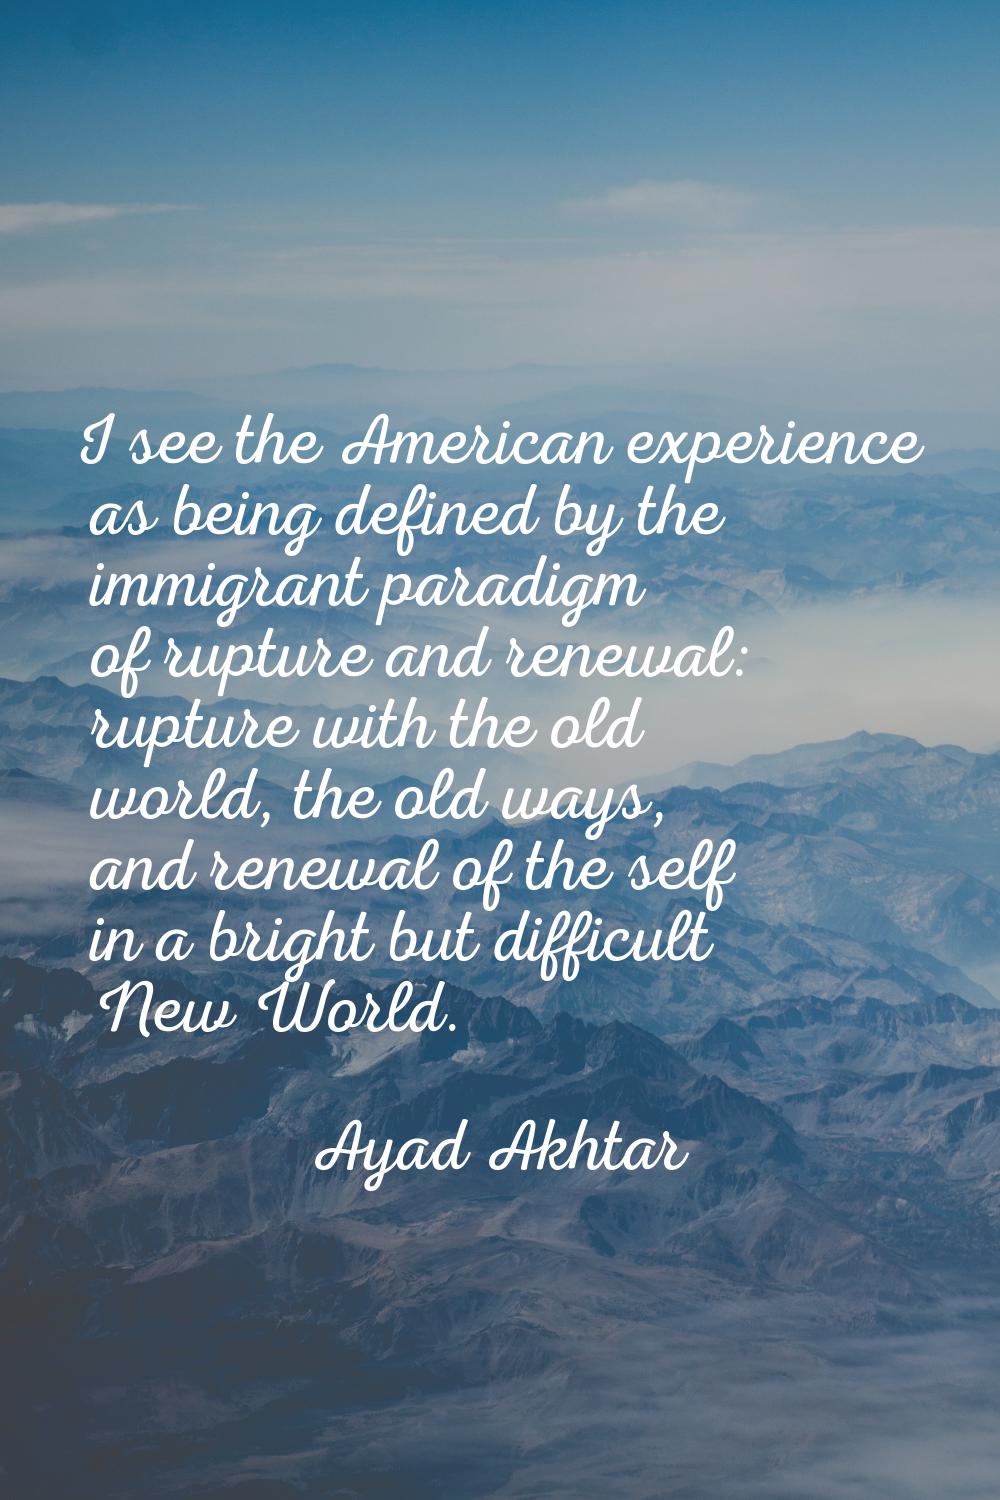 I see the American experience as being defined by the immigrant paradigm of rupture and renewal: ru